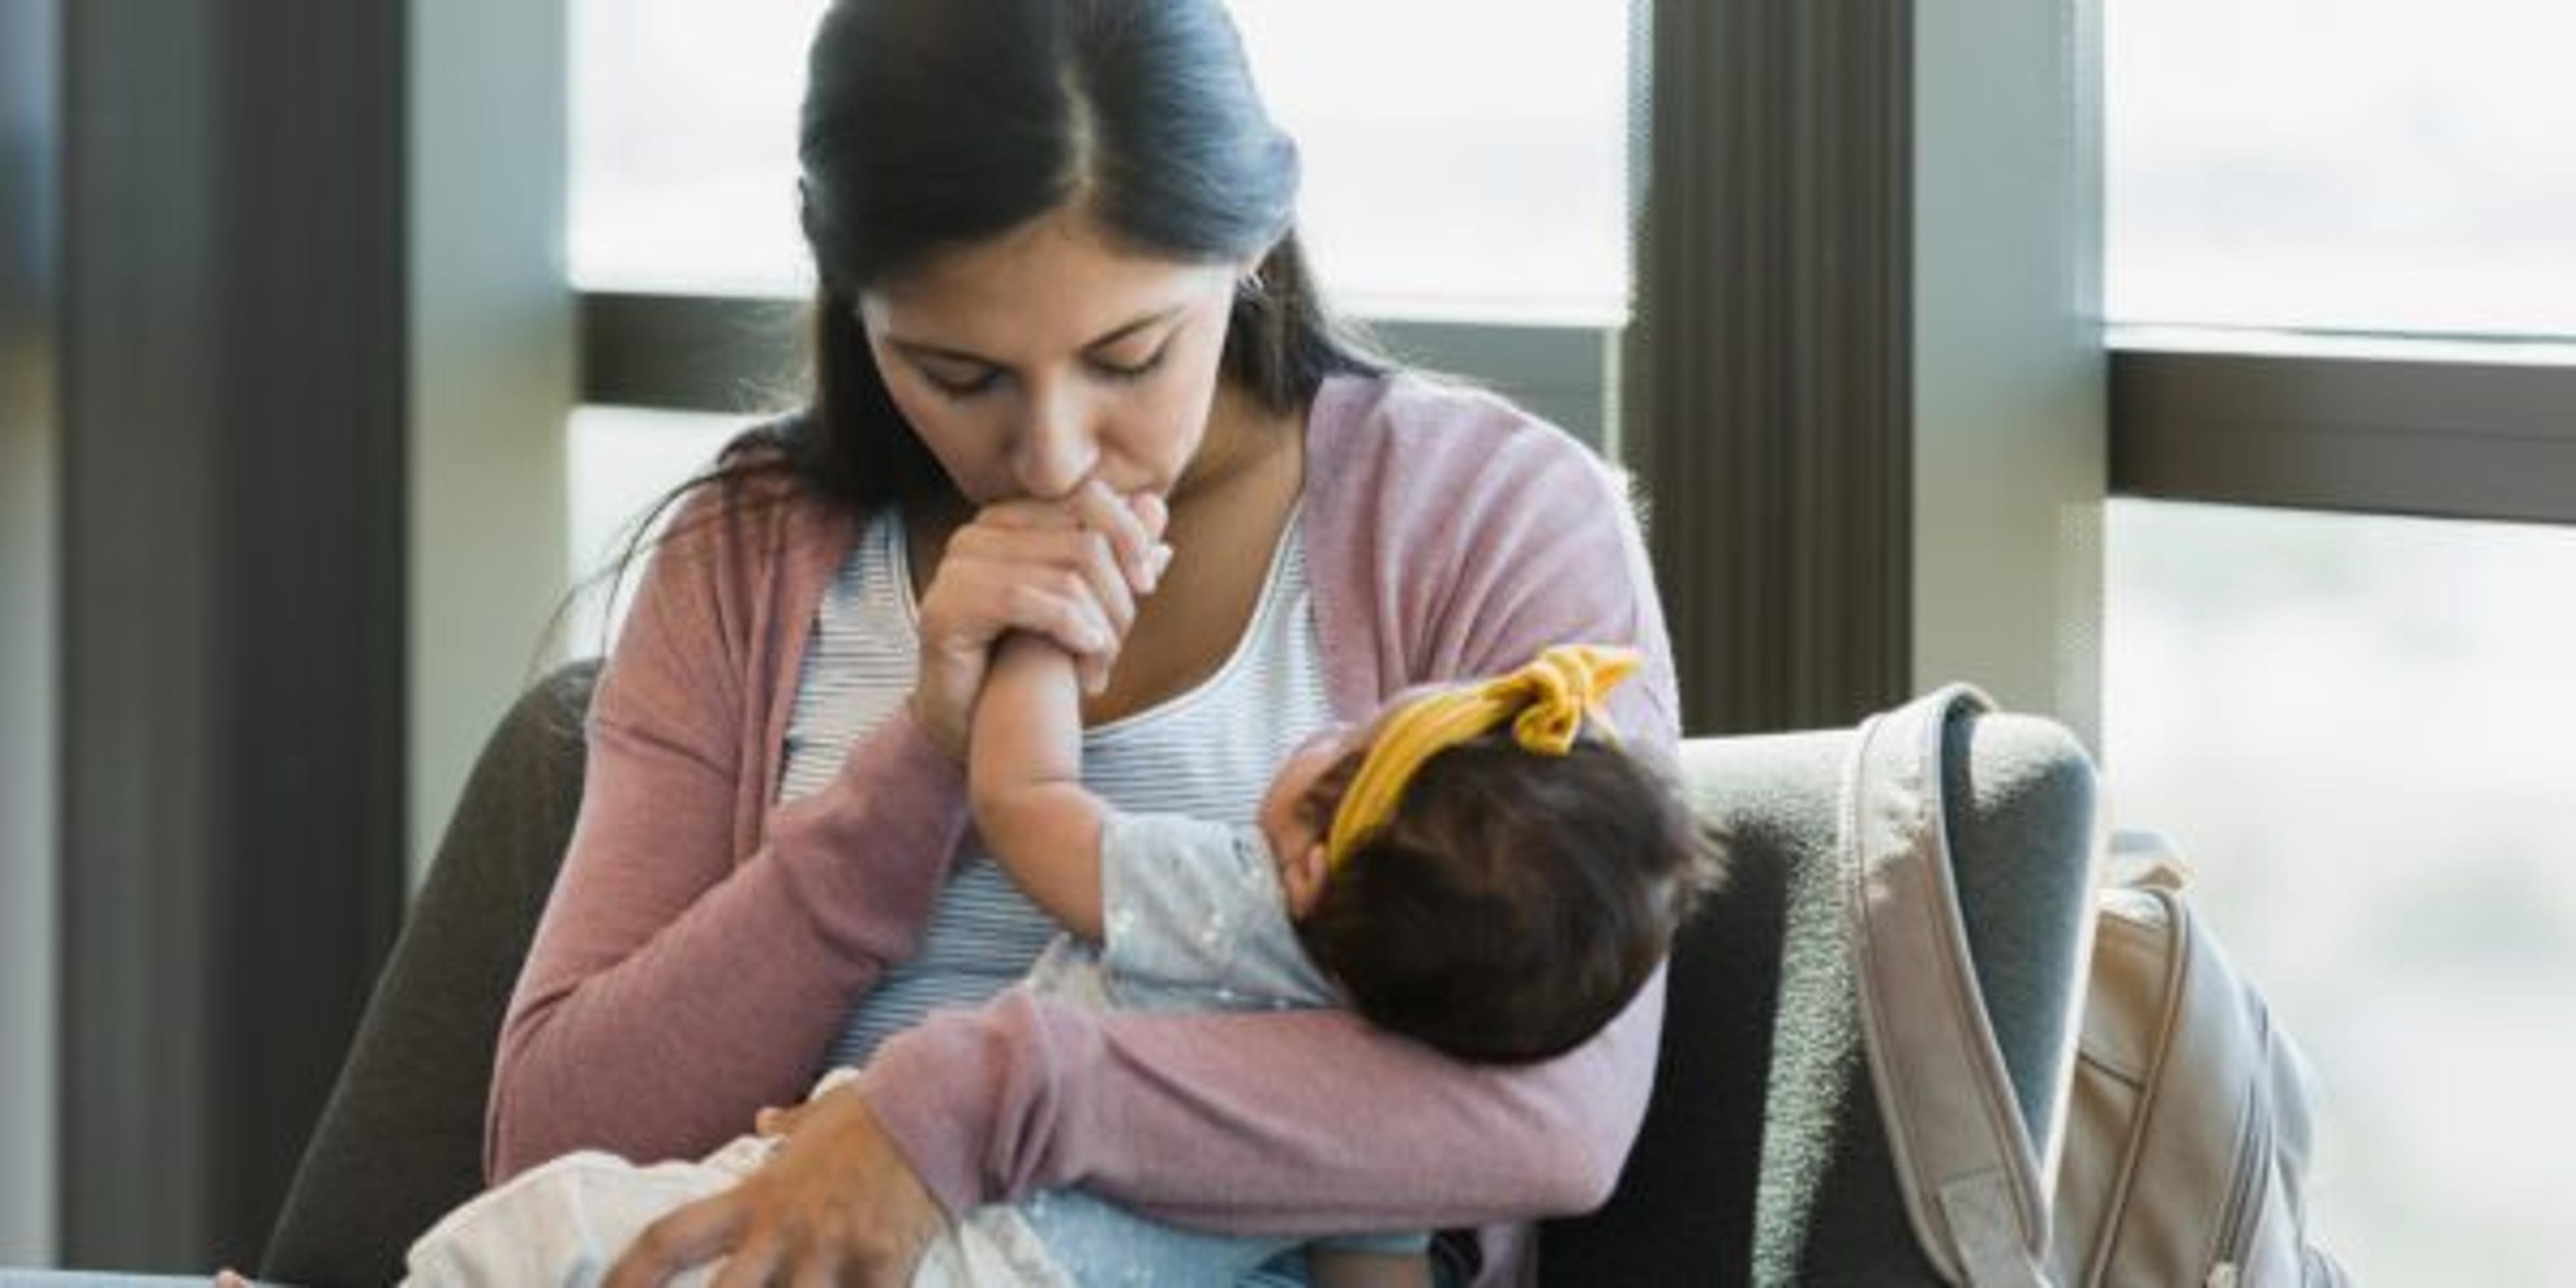 In doctor's waiting room, mother kisses baby's hand